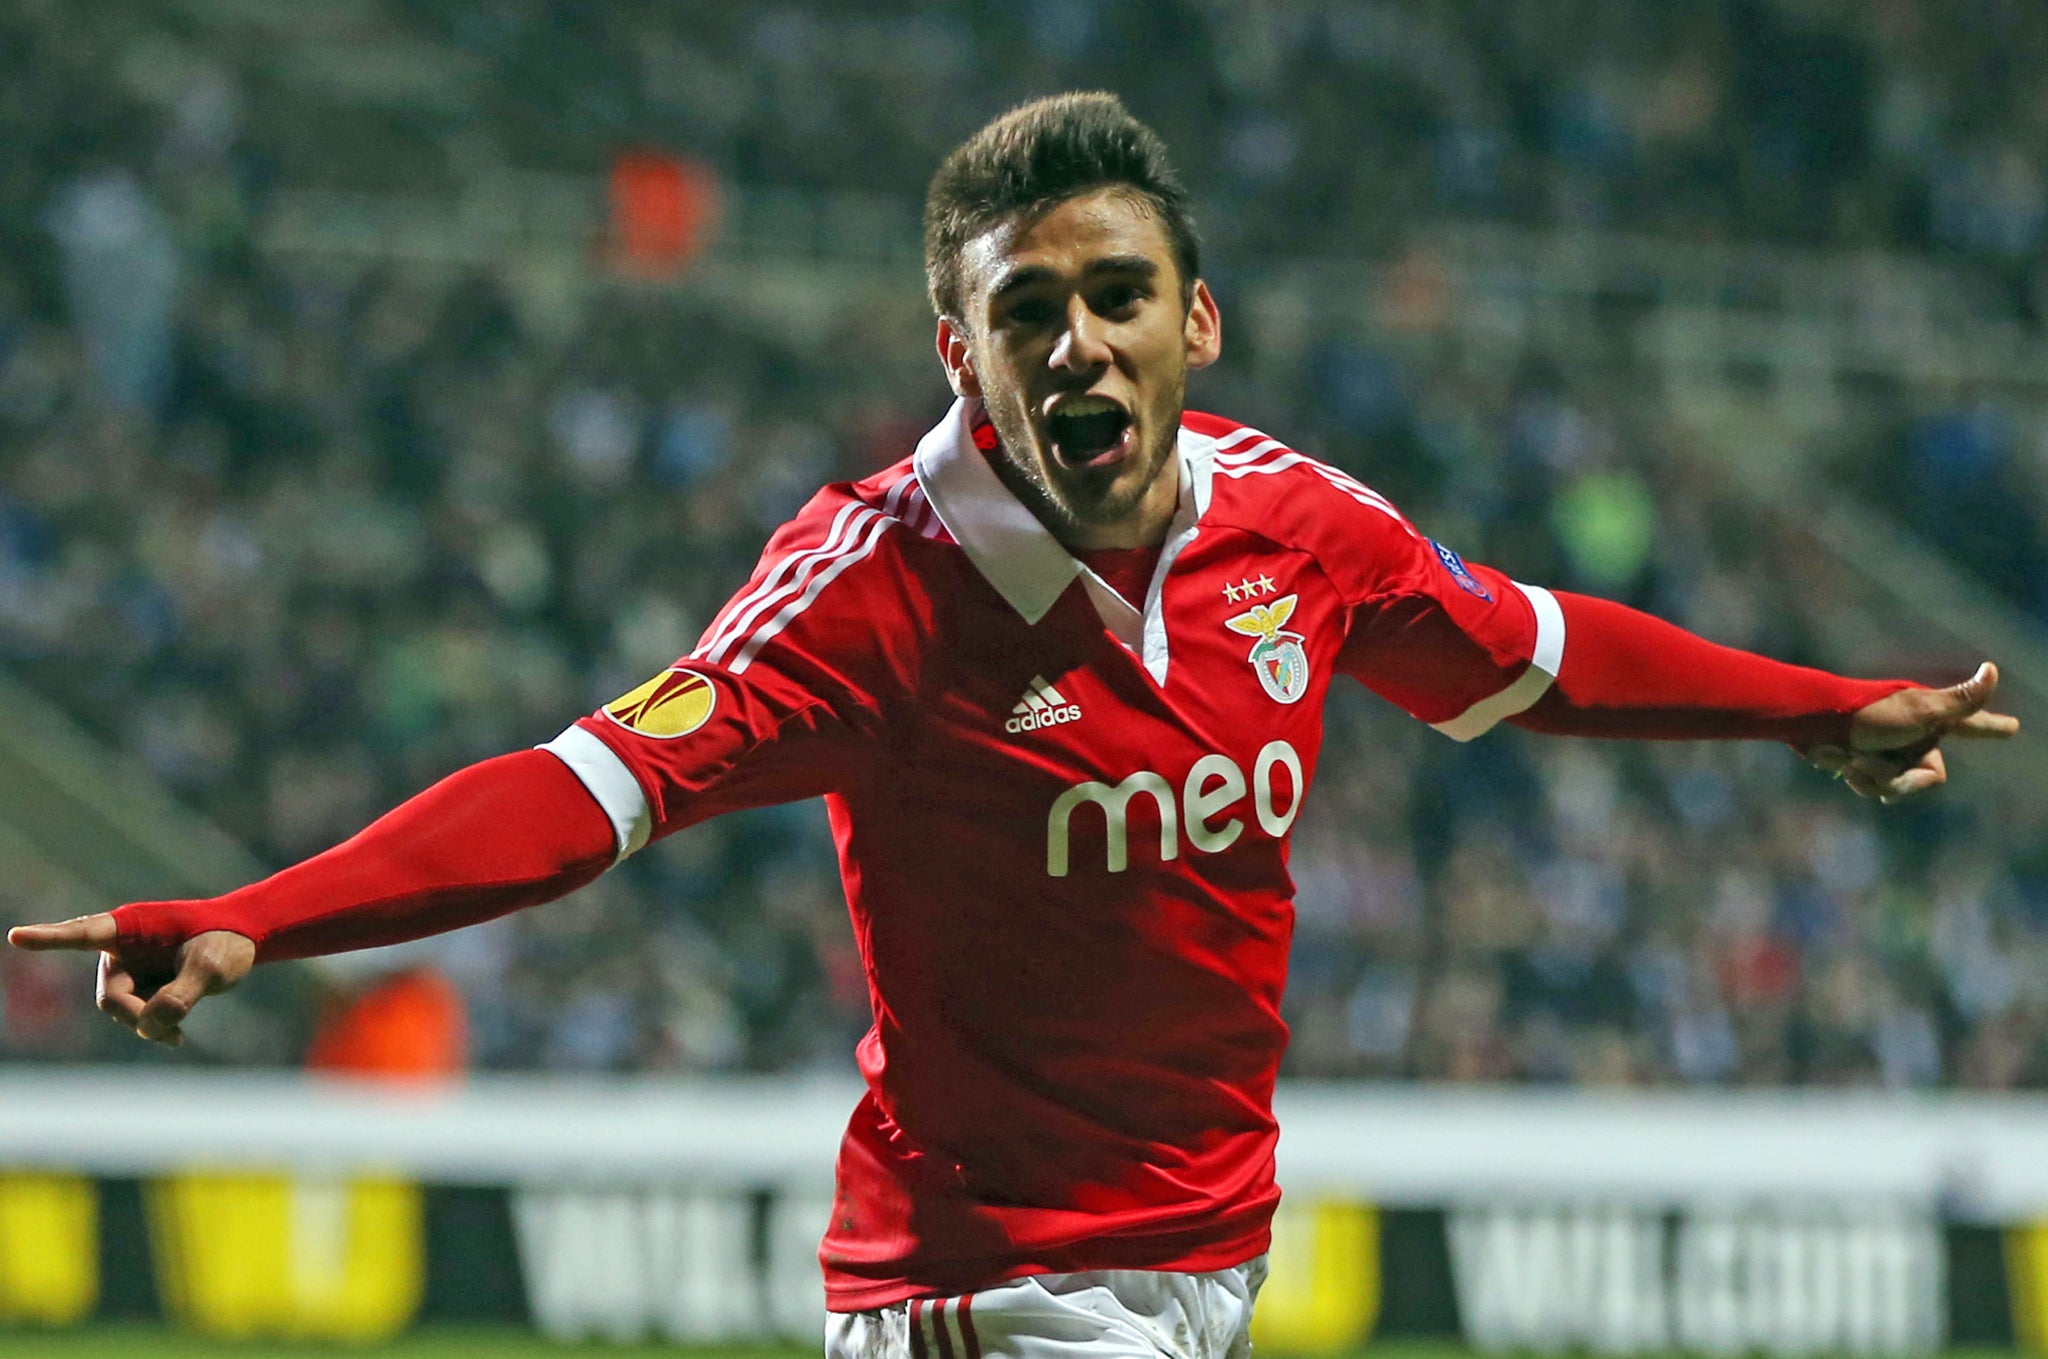 Eduardo Salvio is a similar player to Jesús Navas, the winger, who completed a £17m move, rising to £21.5m in add-ons, from Sevilla to City last month